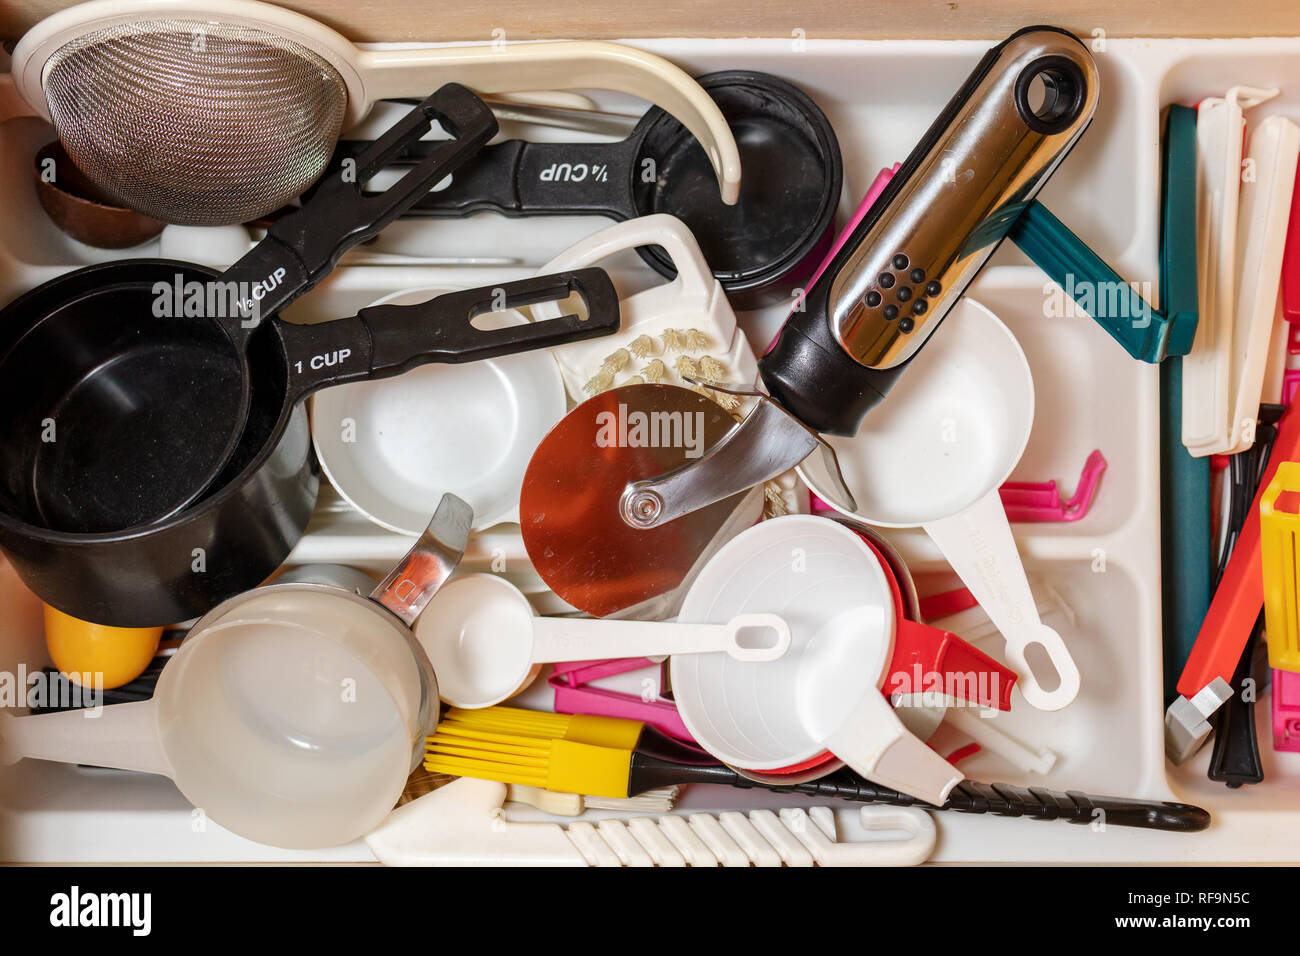 various kitchen utensils in a real life home Stock Photo